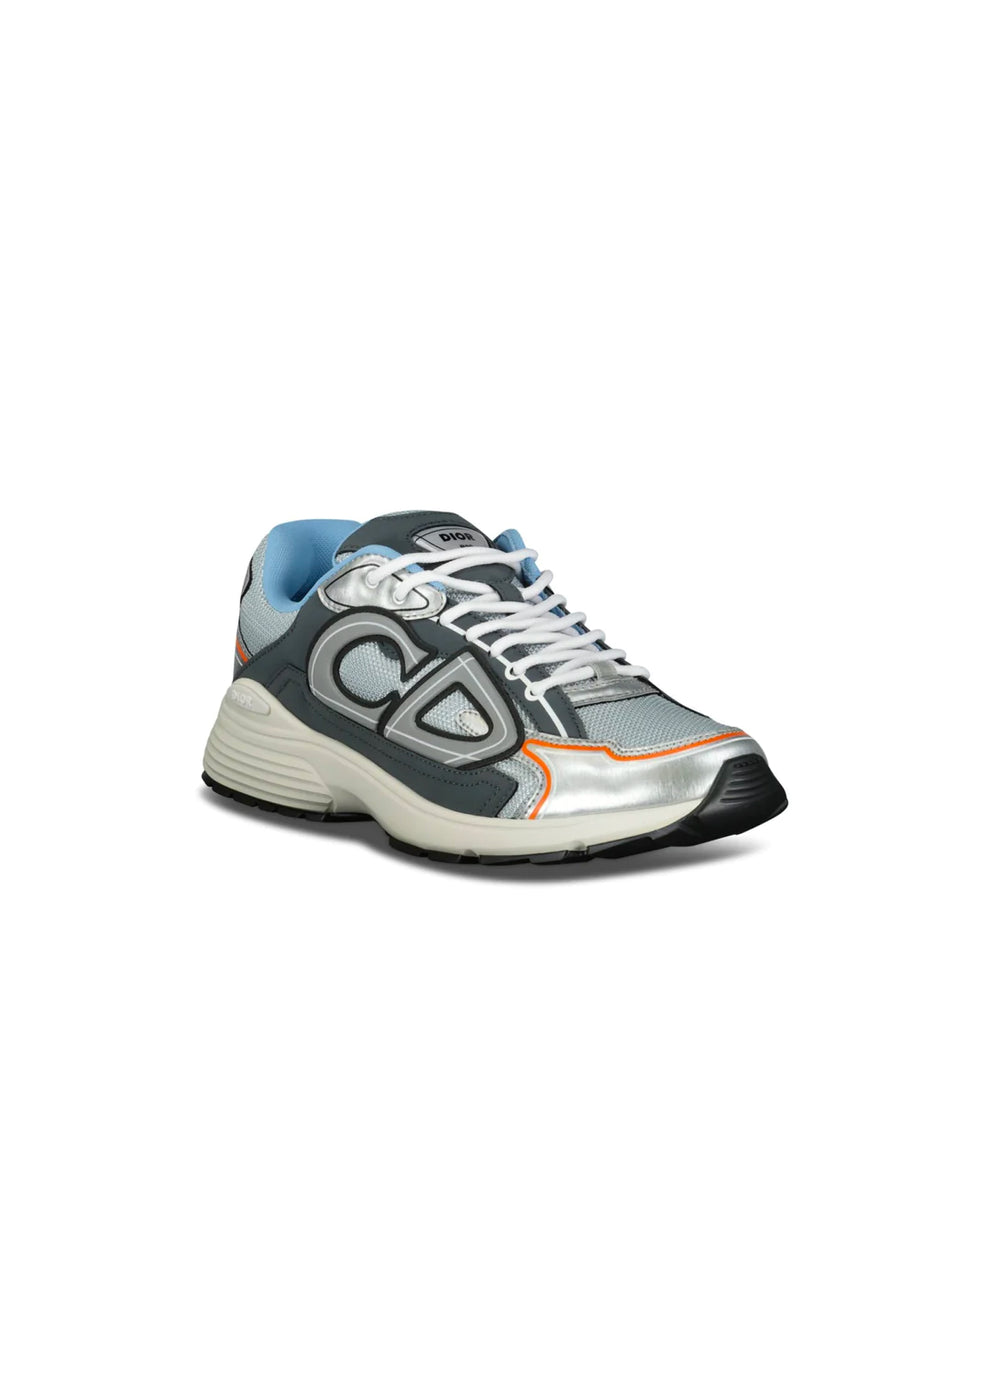 Christian Dior - B30 "Casey Colored" sneakers